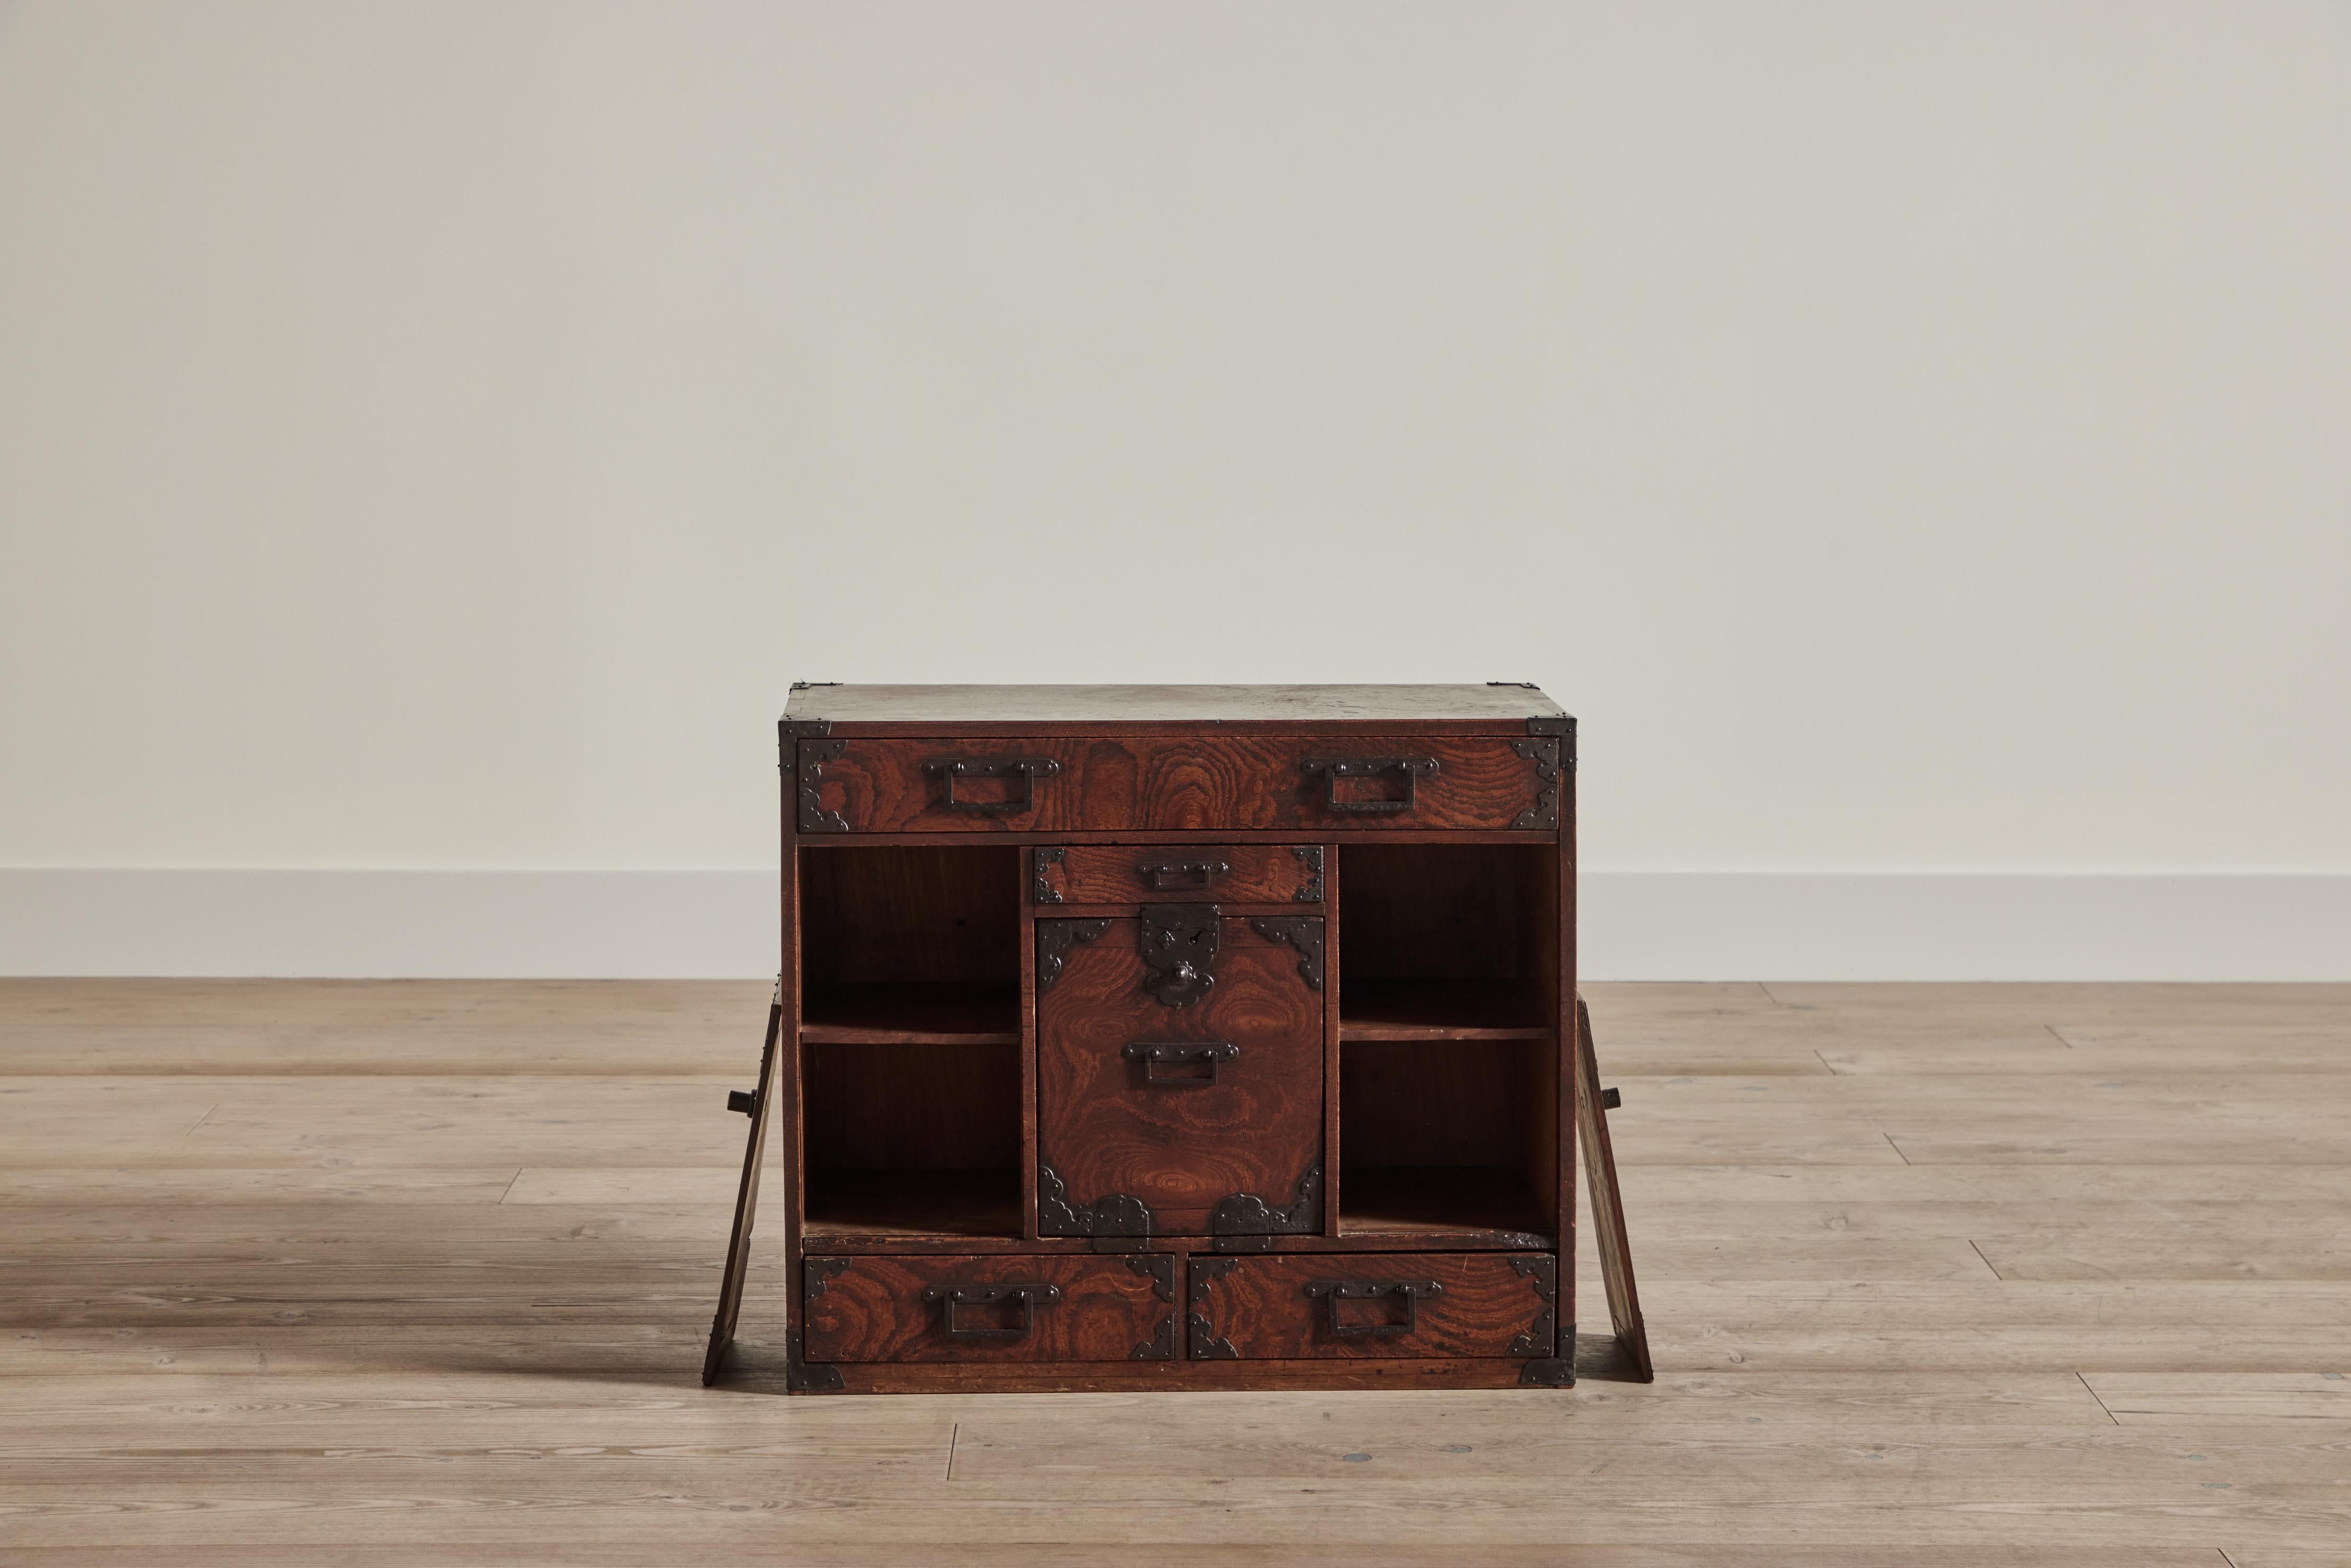 Late 19th century tansu chest from Japan made of Keyaki wood and iron hardware. Chest has multiple drawers and compartments behind three wood doors. 